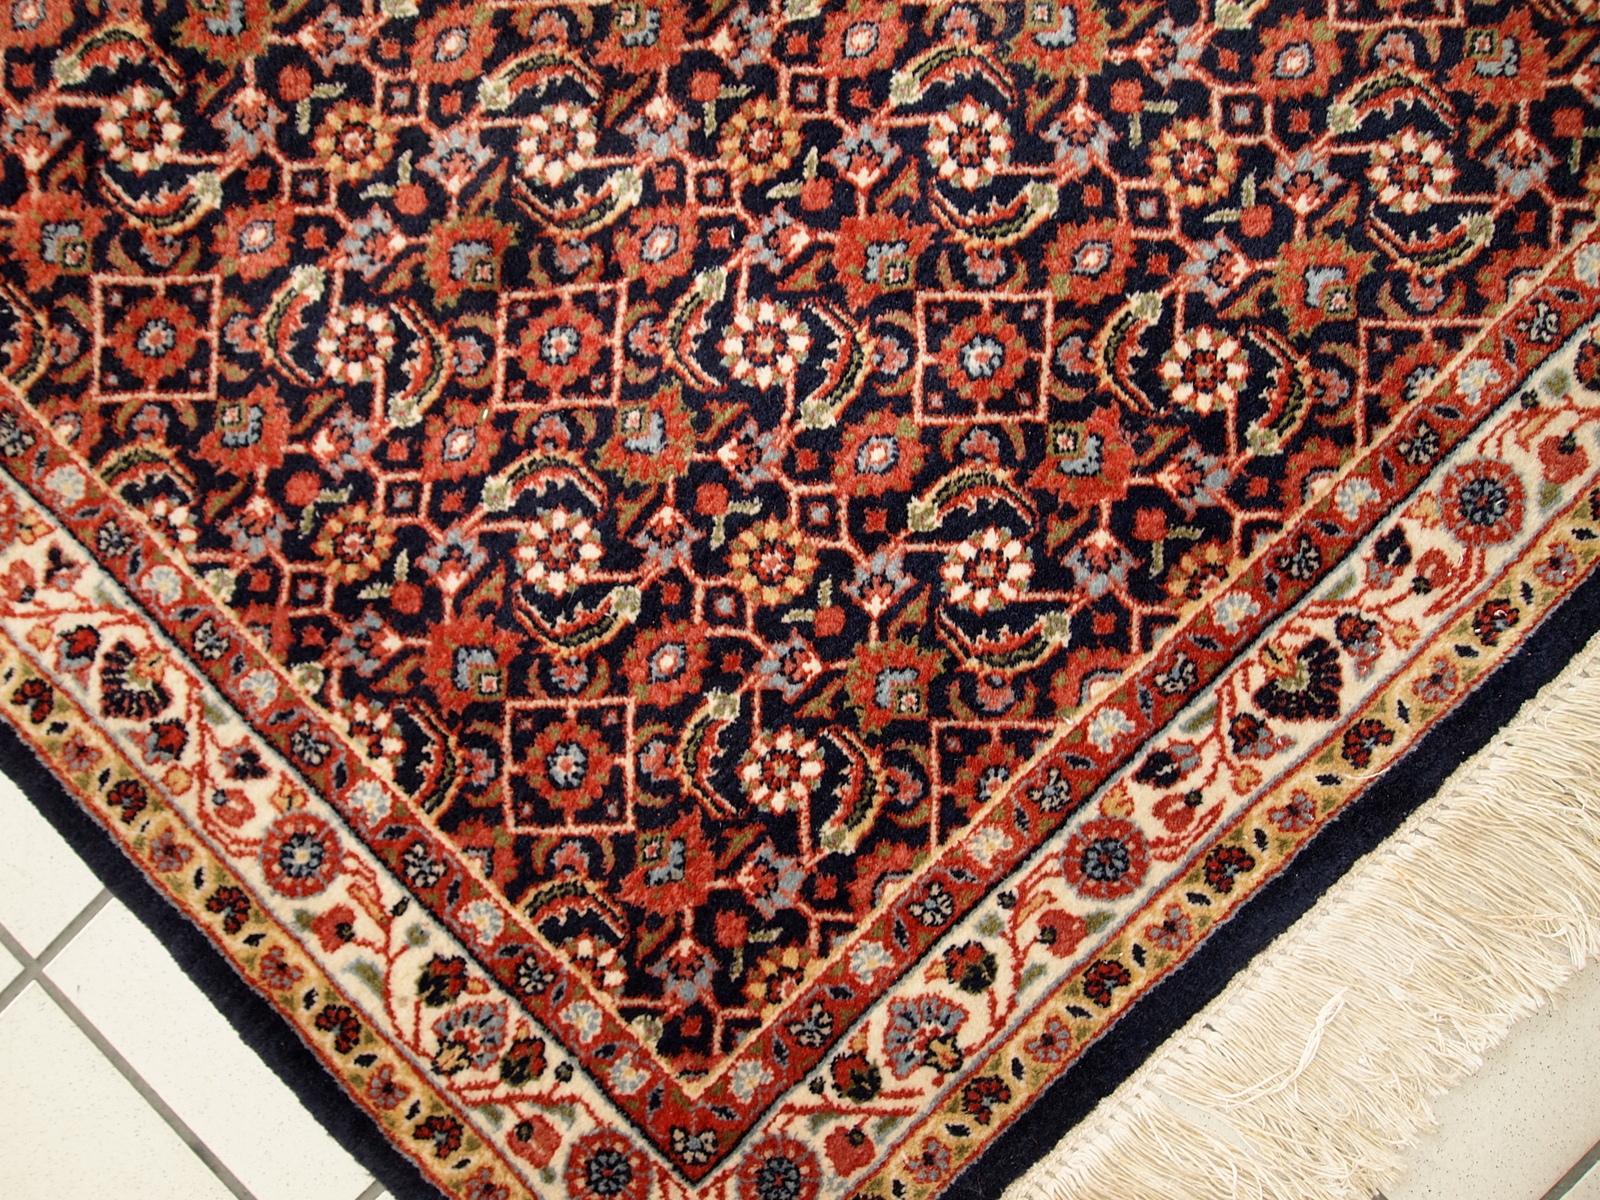 Handmade vintage Indo-Tabriz rug in wool. The rug is from the end of 20th century in original good condition.

-condition: original good,

-circa: 1980s,

-size: 3.3' x 4.2' (100cm x 130cm),

-material: wool,

-country of origin: